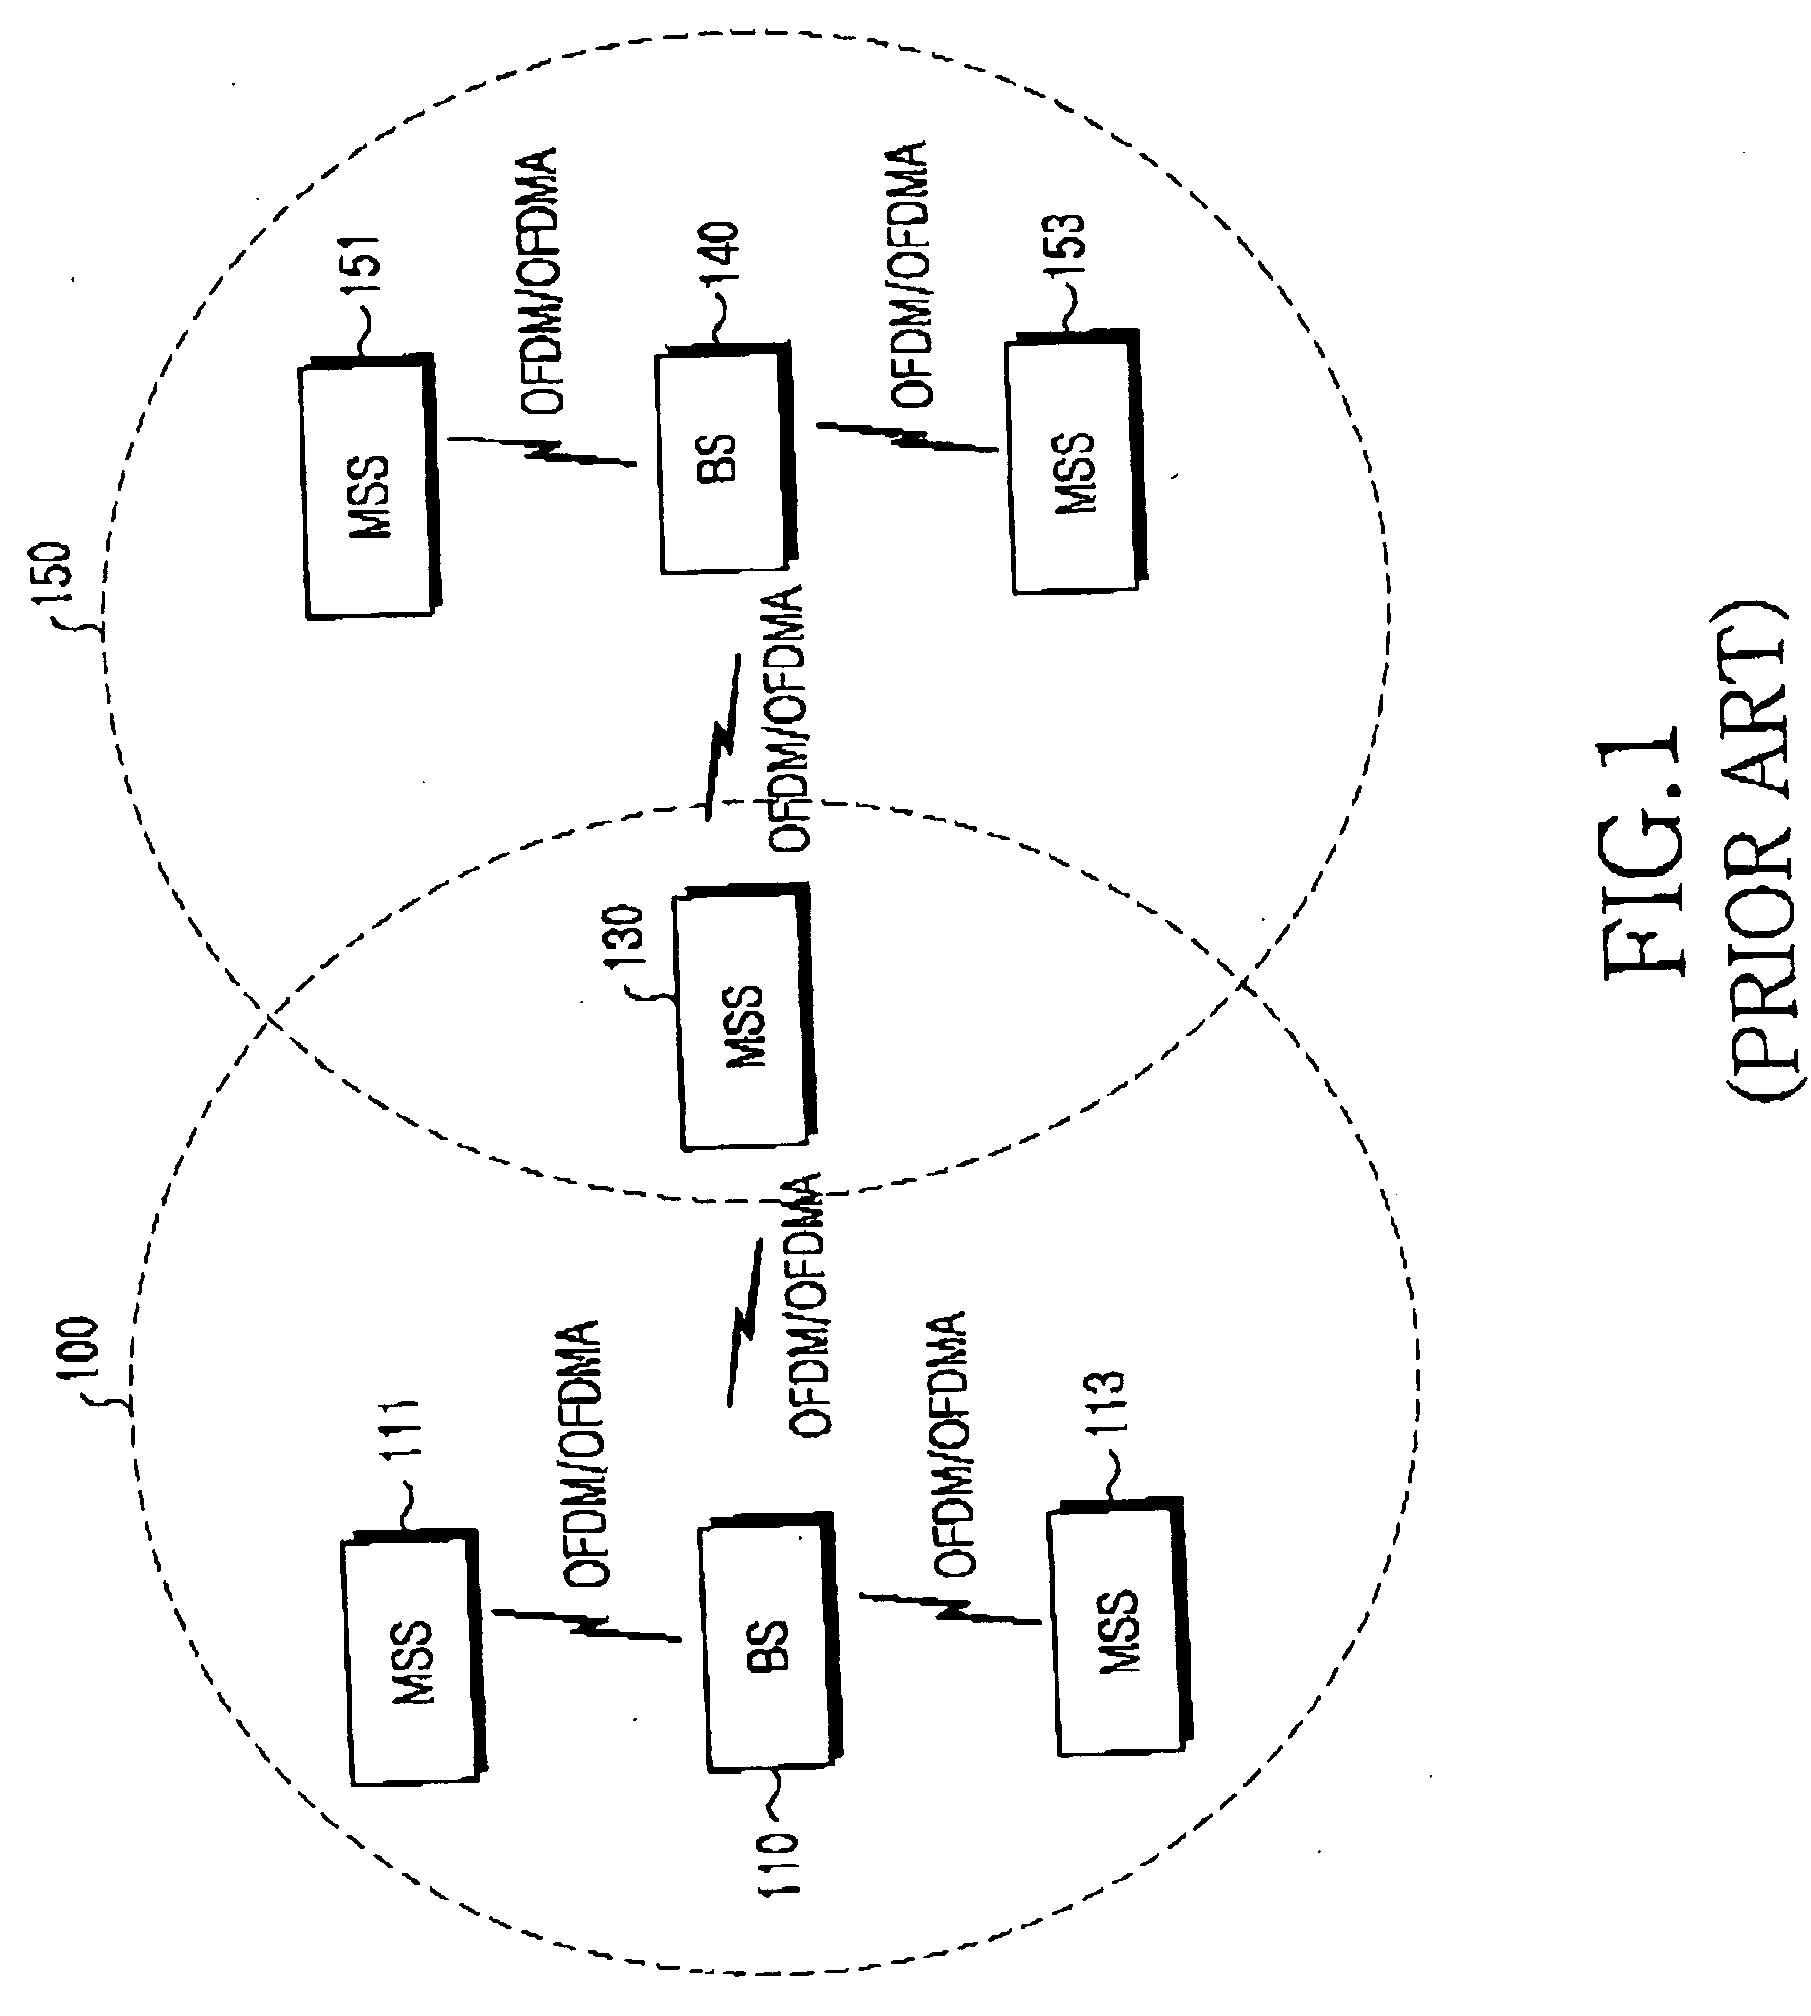 Handover system and method for minimizing service delay due to pingpong effect in a broadband wireless access communication system